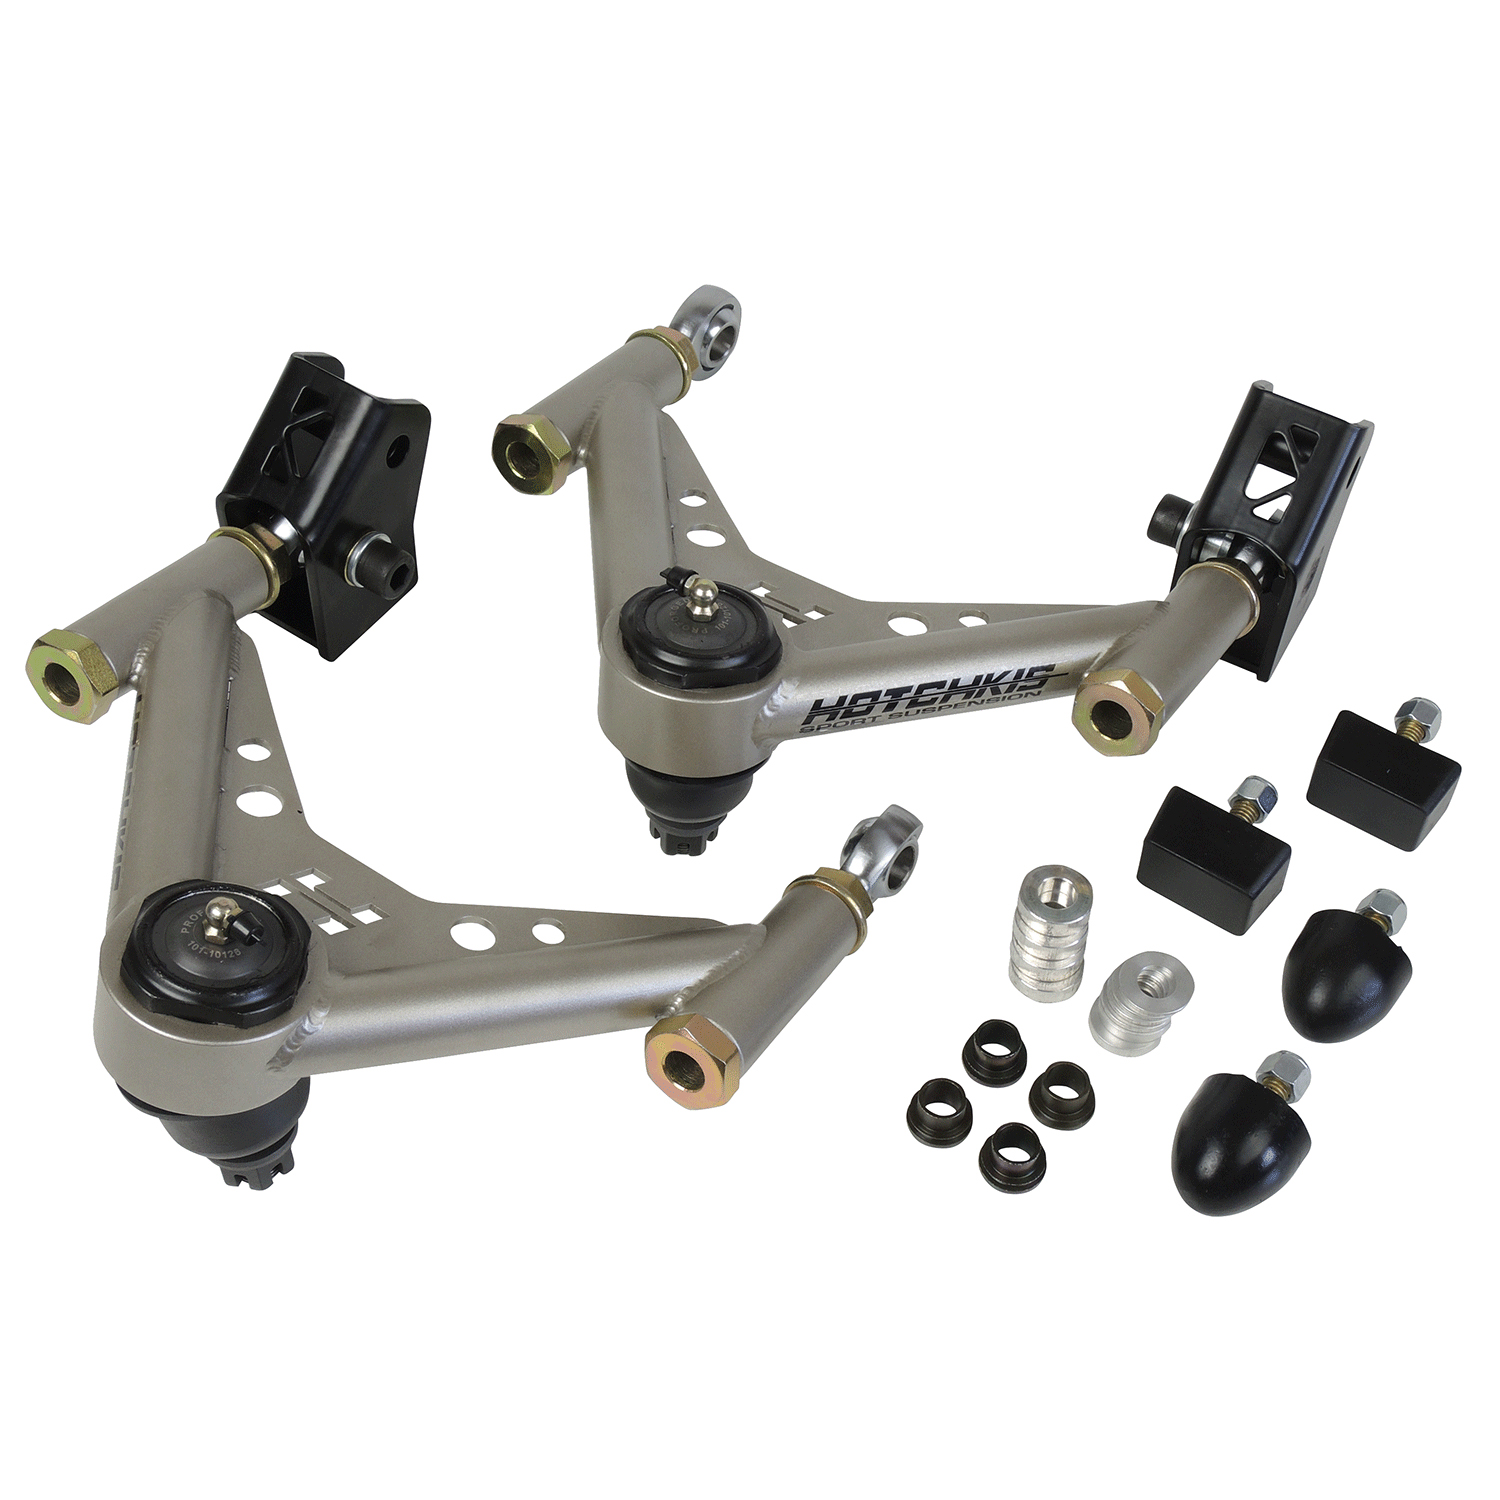 New “ON CAR ADJUSTABLE” Dodge B&E Body Geometry Corrected Tubular Upper A-Arms